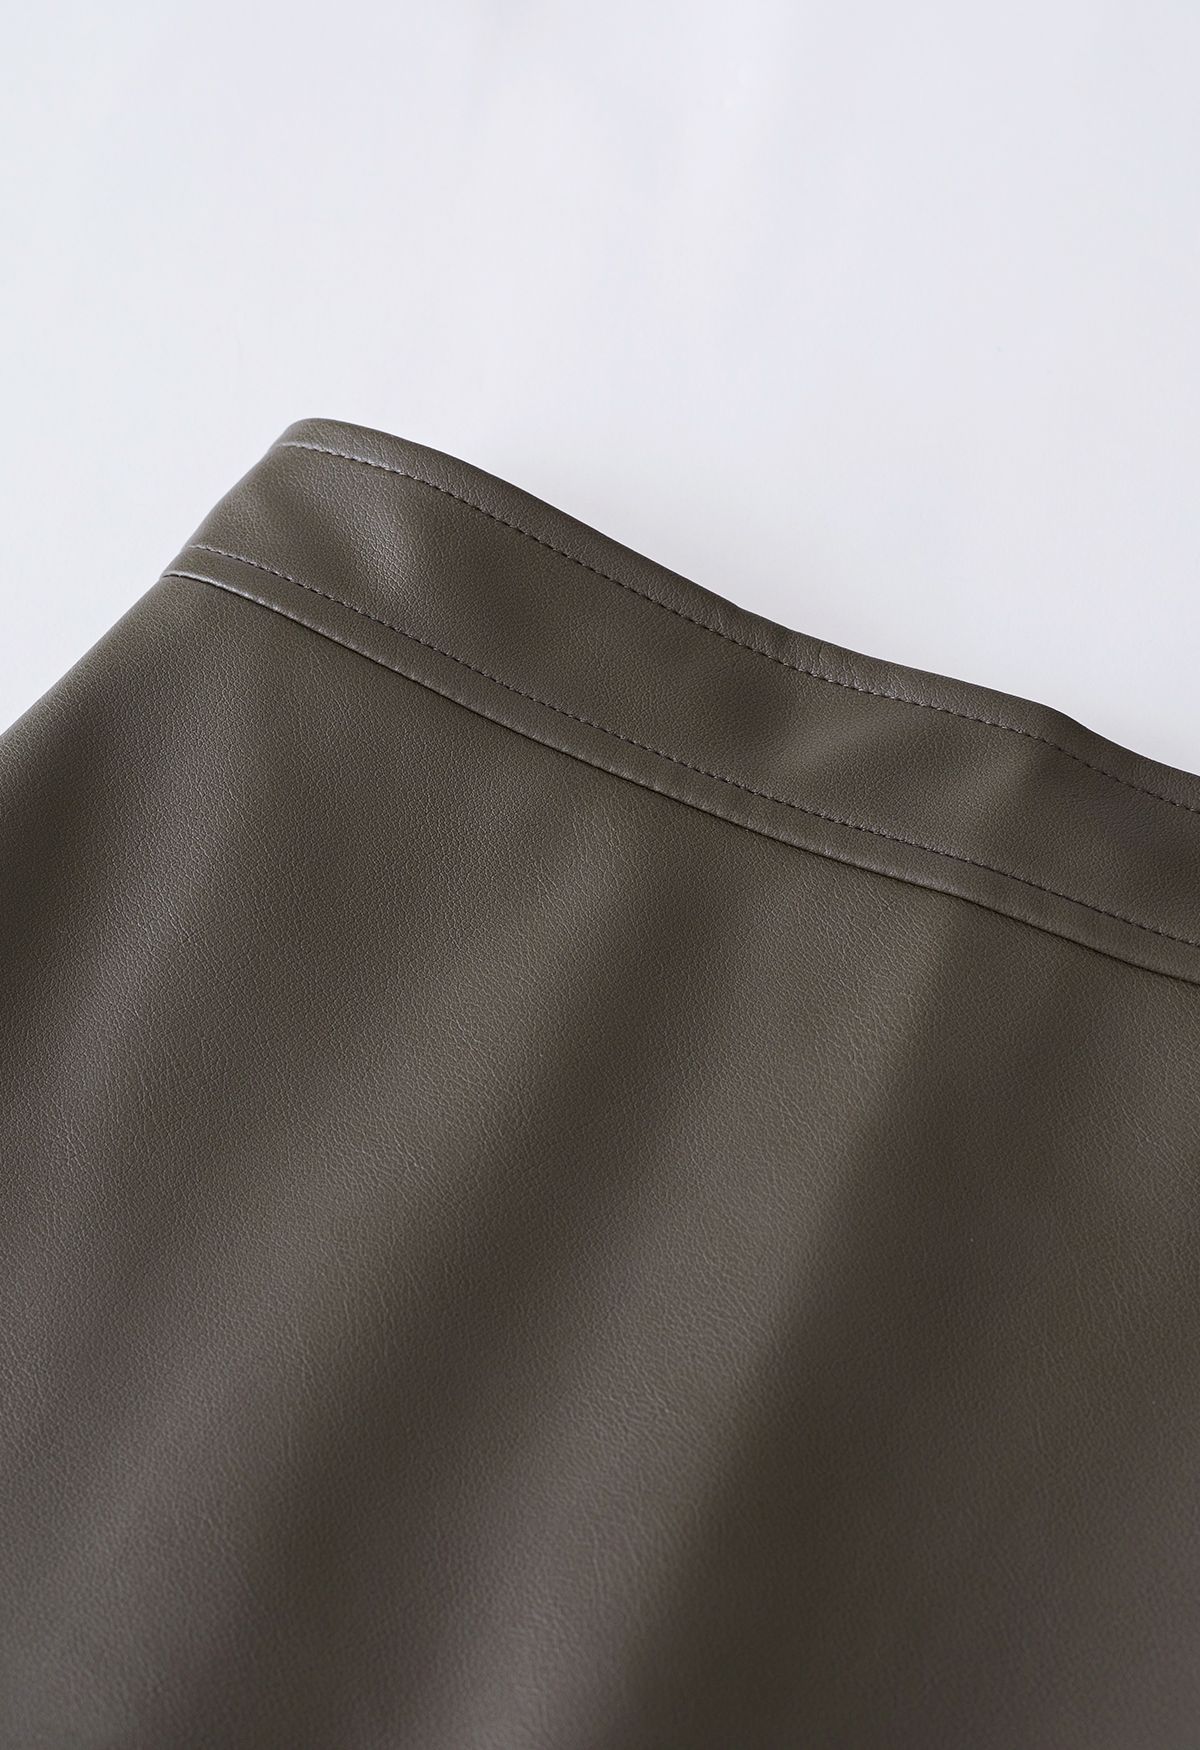 Nifty Faux Leather Flap Mini Bud Skirt in Olive